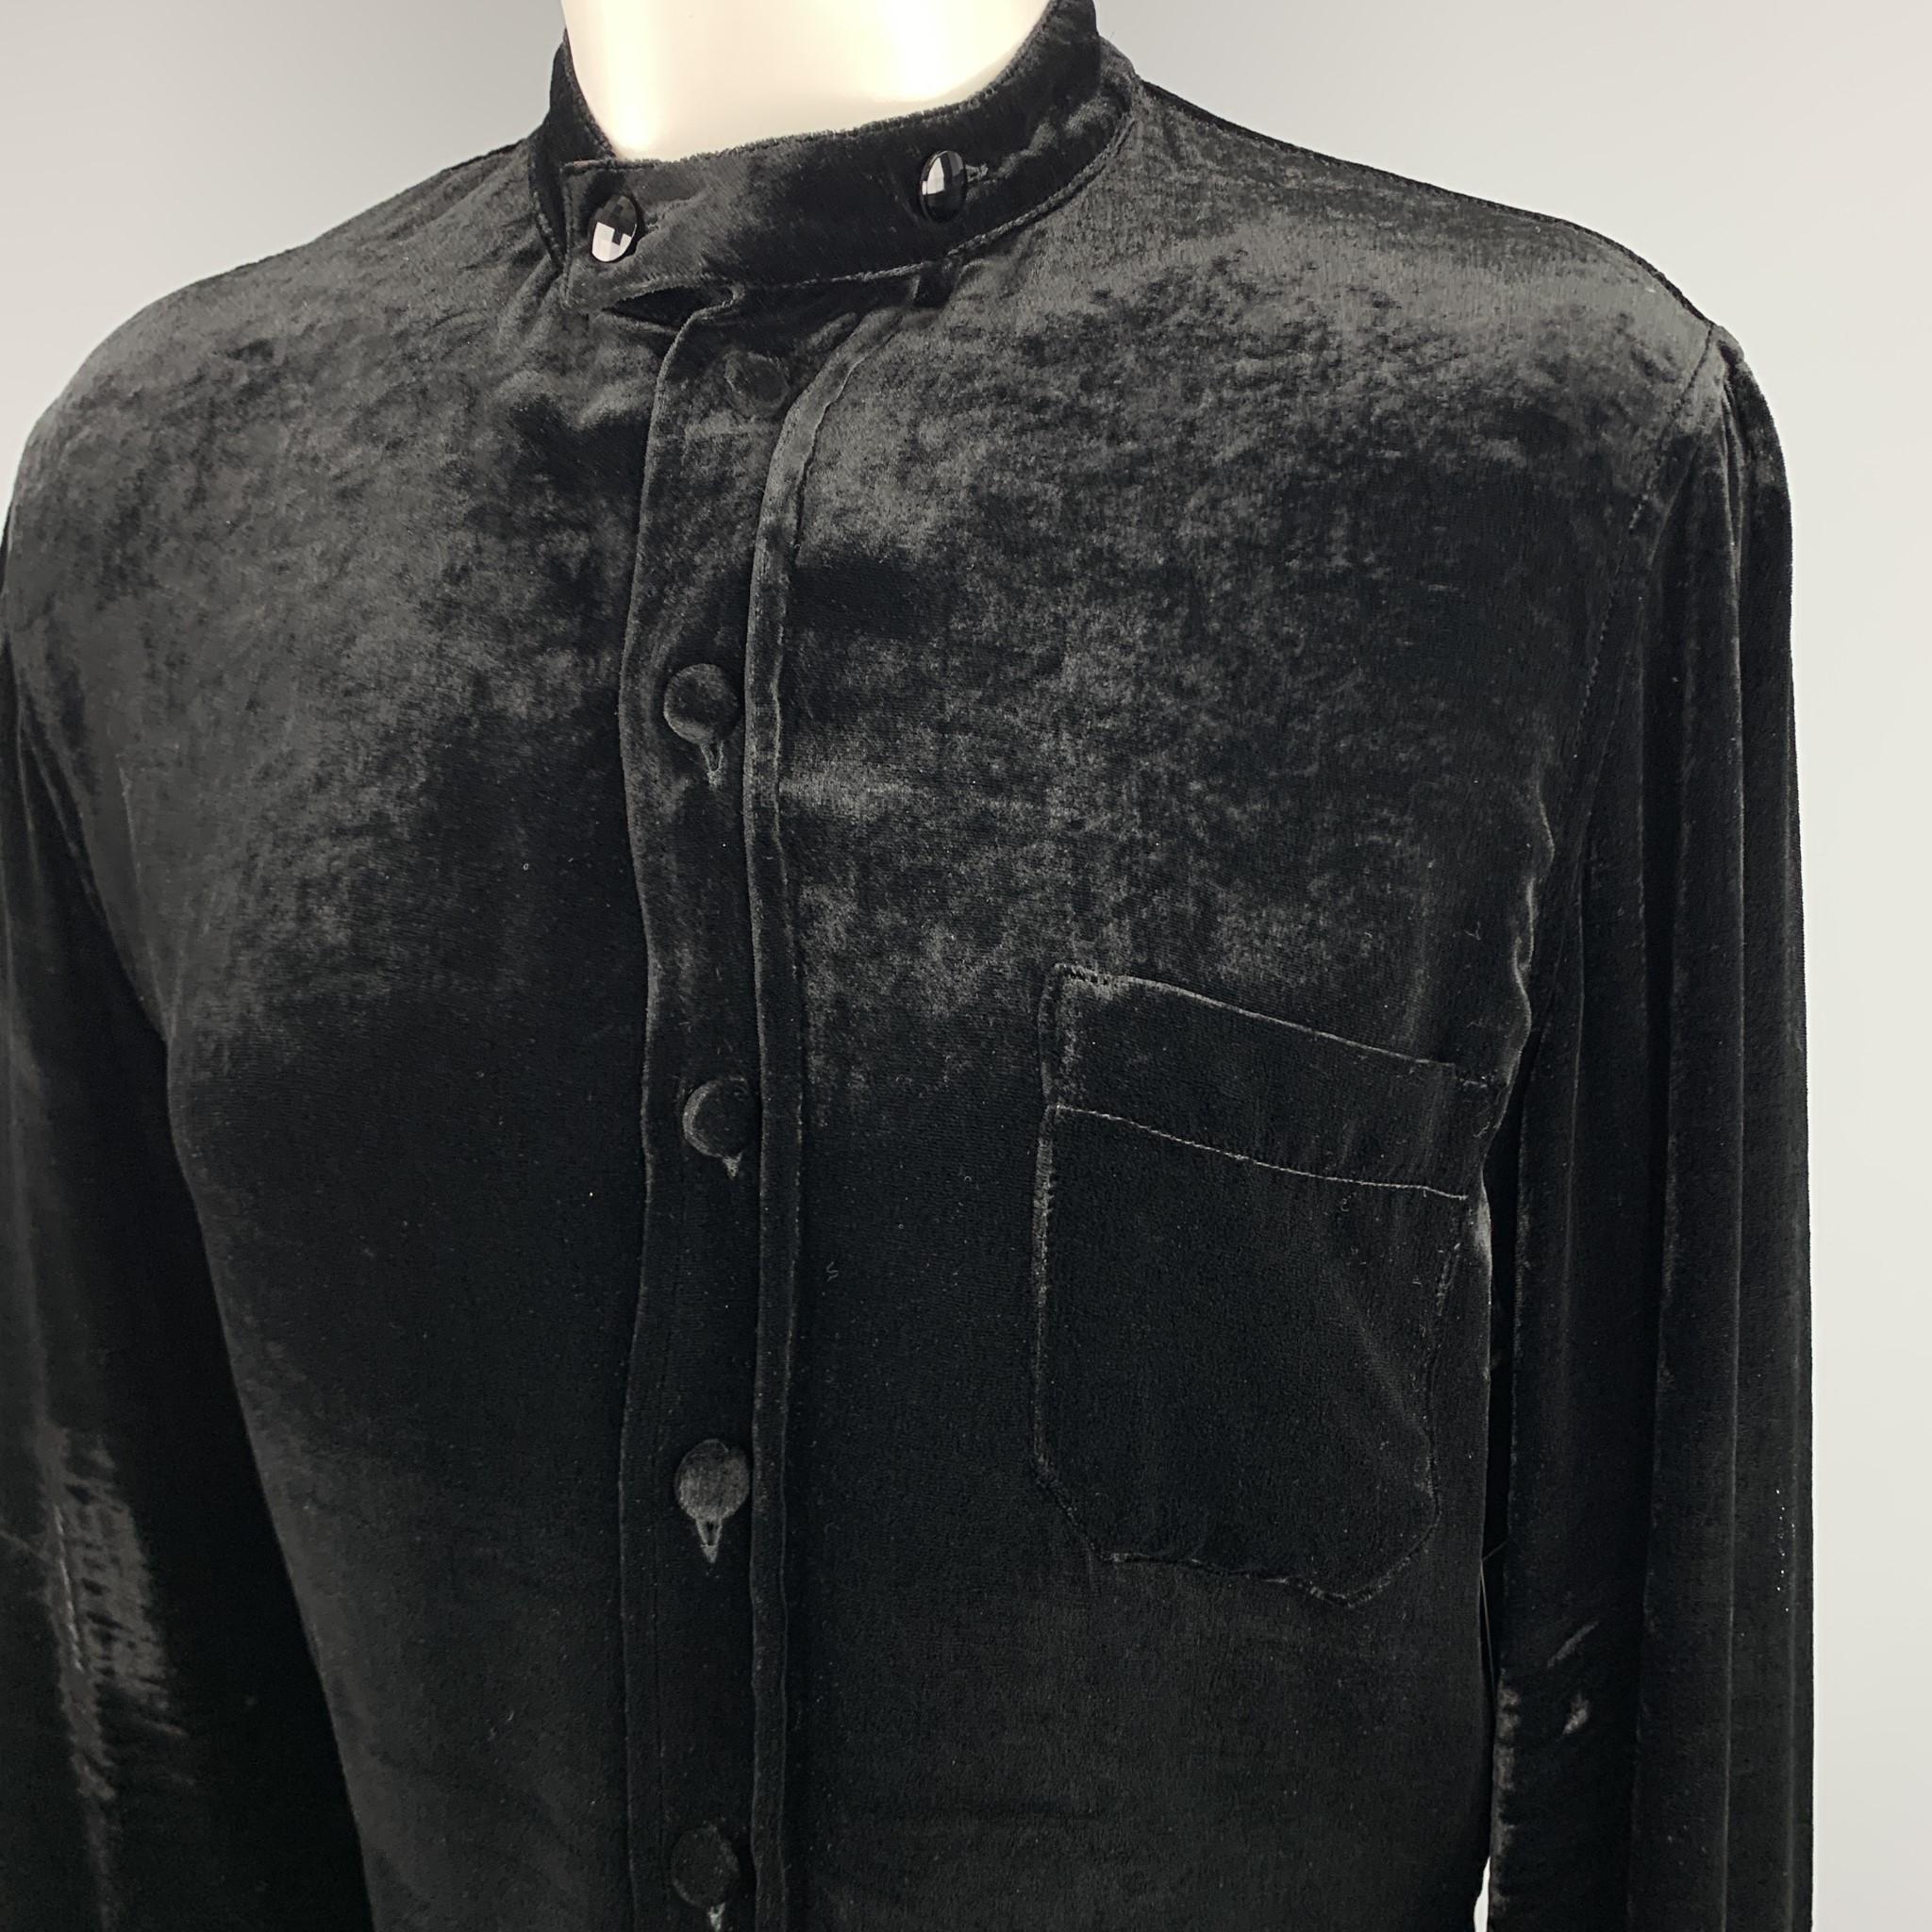 Vintage JEAN PAUL GAULTIER top comes in silk blend velvet velour and a band collar and zip cuffs. Matching trousers available separately.  Made in Italy.

Excellent Pre-Owned Condition.
Marked: USA 10

Measurements:

Shoulder: 16 in.
Bust: 40